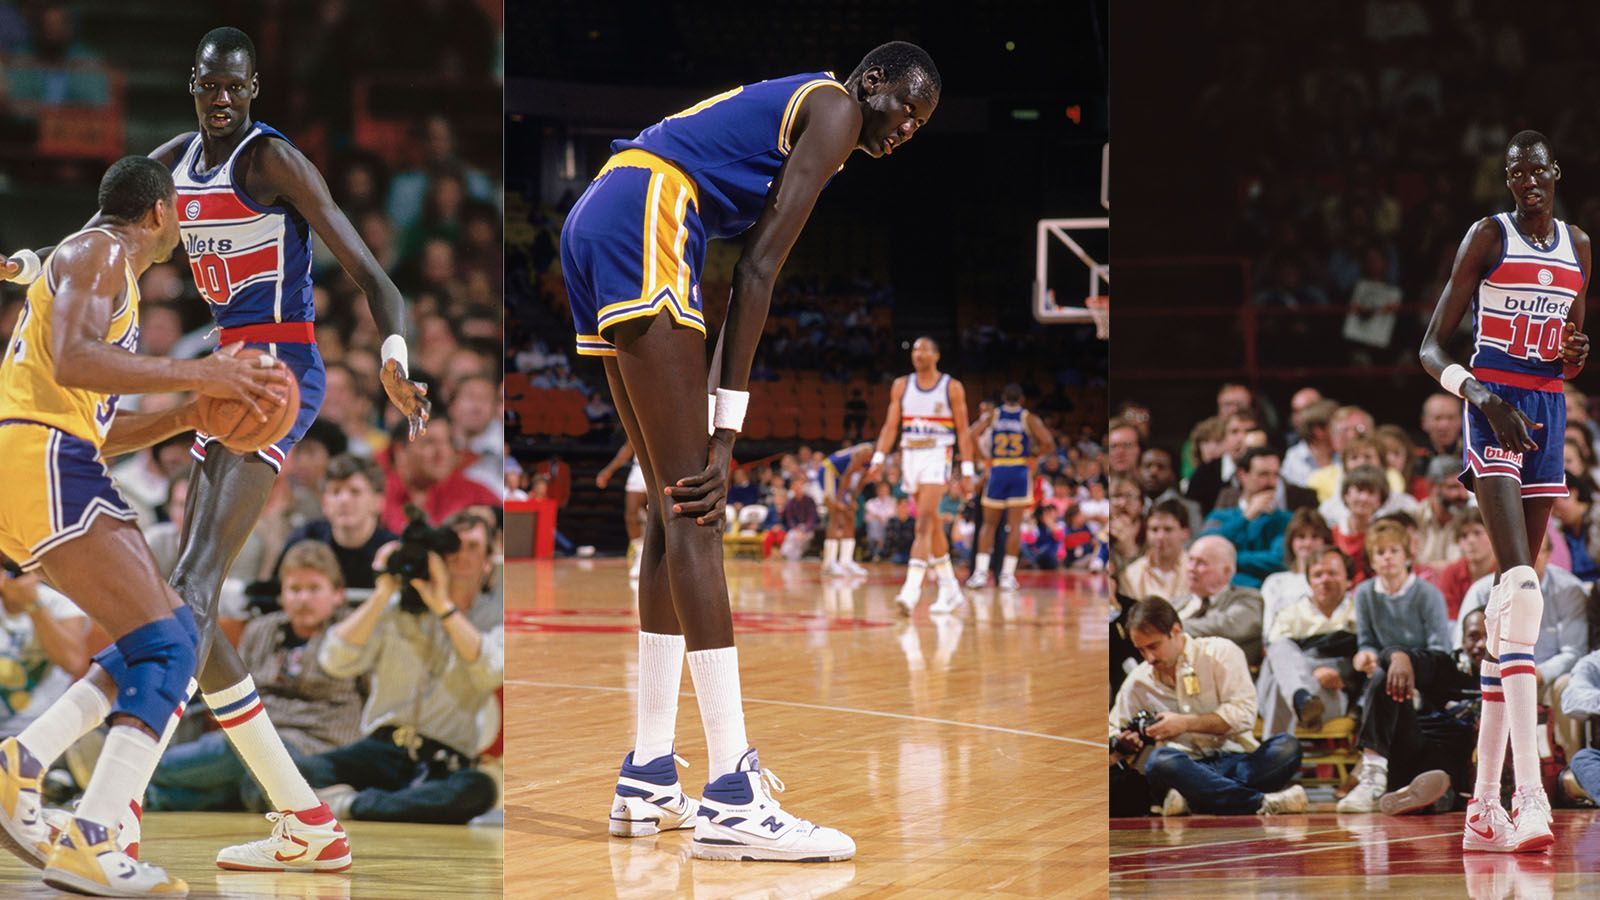 <strong>Manute Bol - 2,31m</strong><br><strong>Teams:</strong> Washington Bullets, Golden State Warriors, Philadelphia 76ers, Miami Heat<br><strong>Karriere-Stats:</strong> 2,6 Punkte, 4,2 Rebounds, 0,3 Assists, 3,3 Blocks<br><strong>Auszeichnungen:</strong> 1x All-Defensive